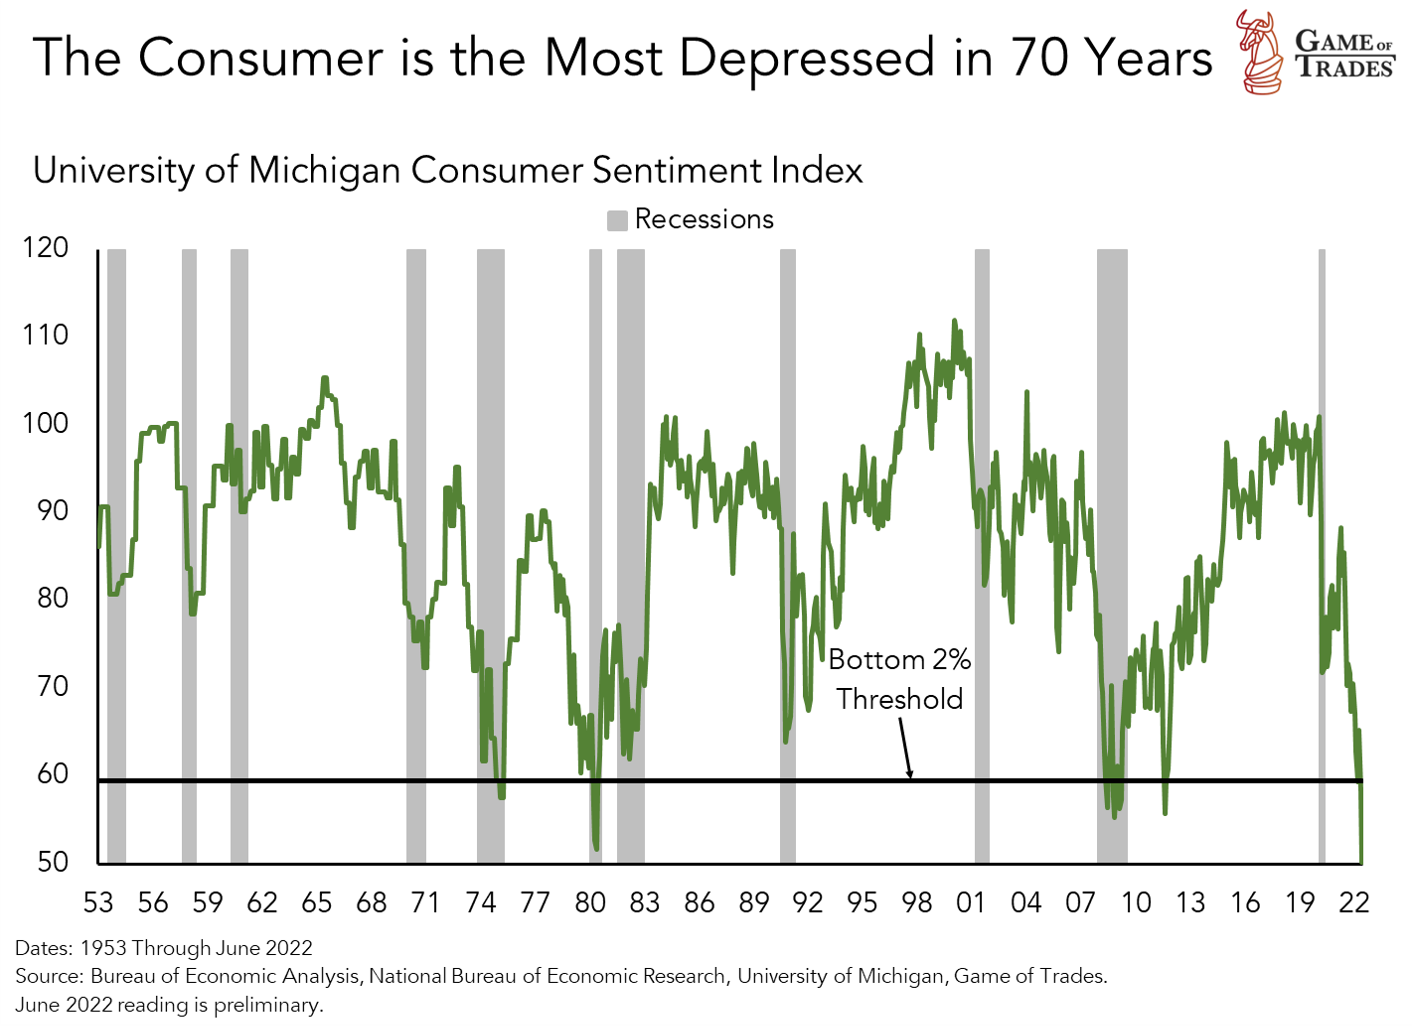 The Consumer is Down But Not Out, A Contrarian Bet Against Record-High Pessimism